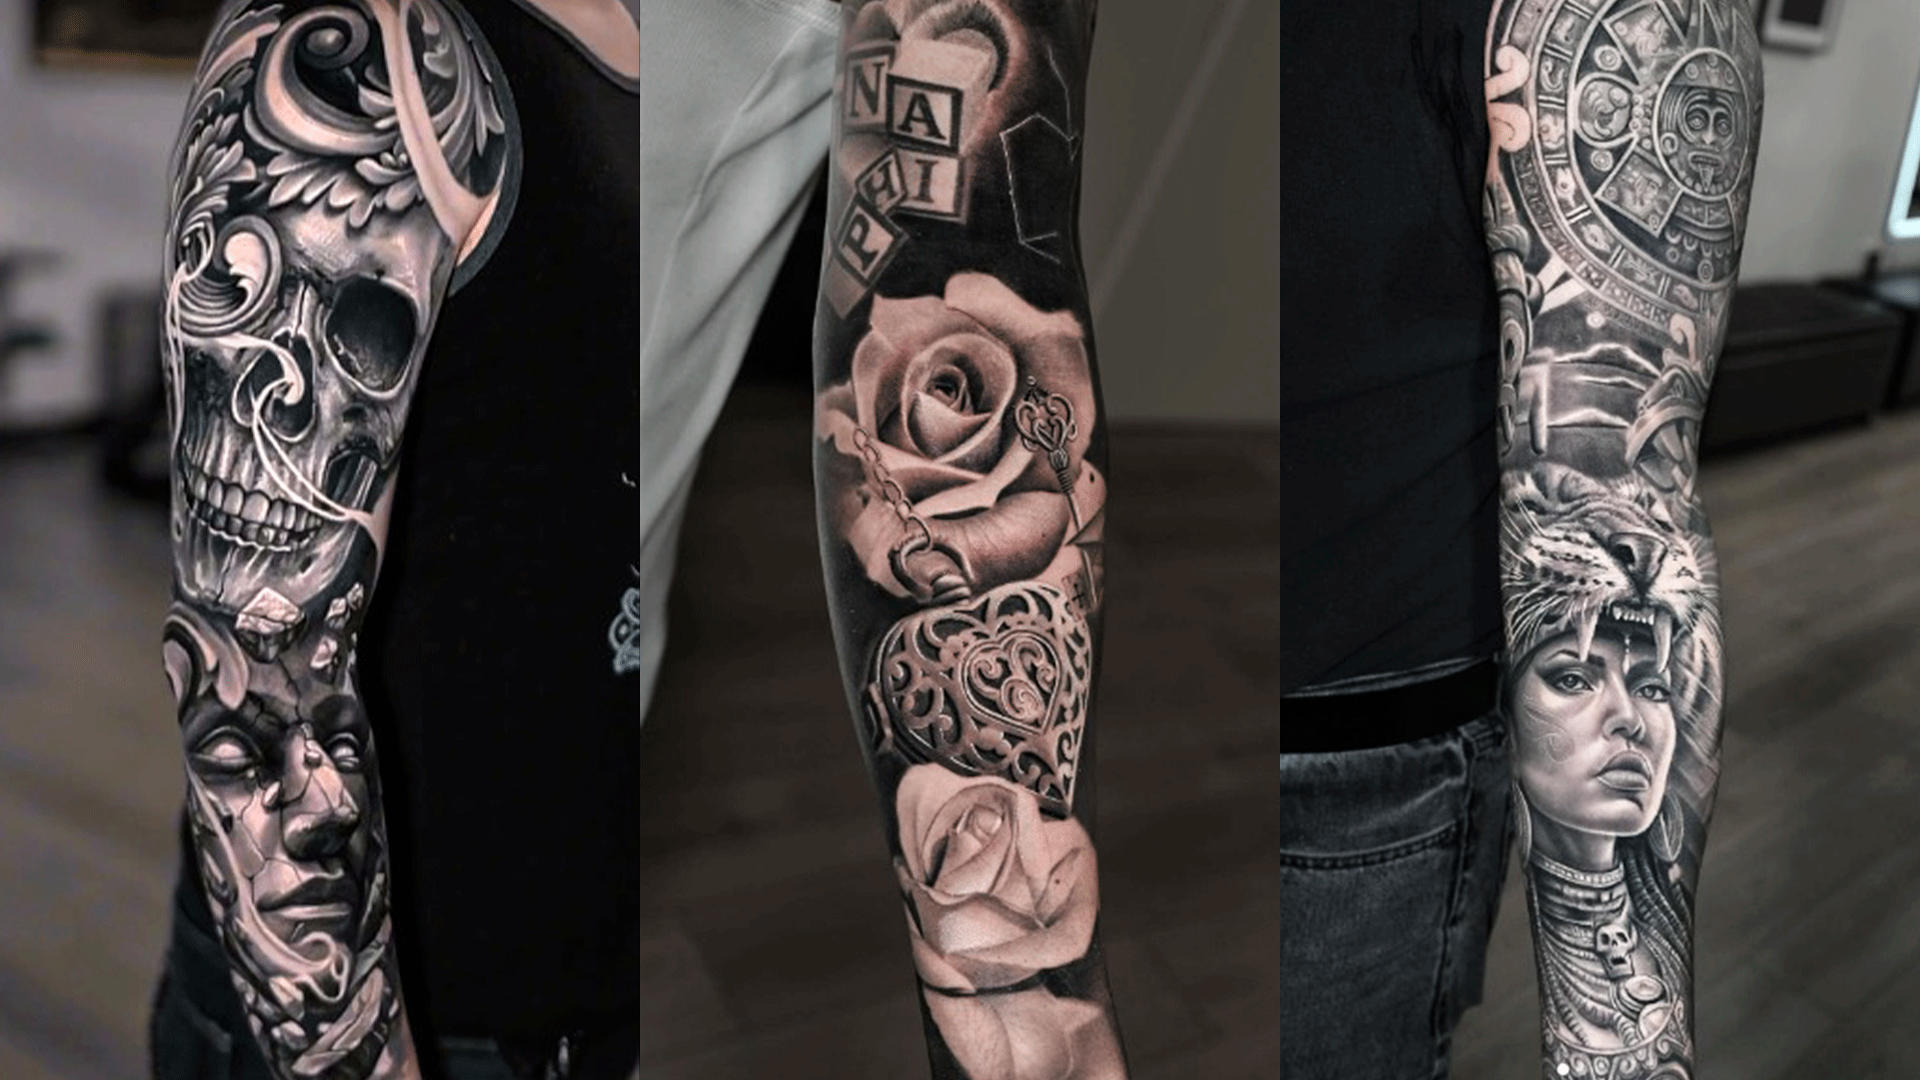 101 Best Inner Forearm Tattoo Ideas You Have To See To Believe!